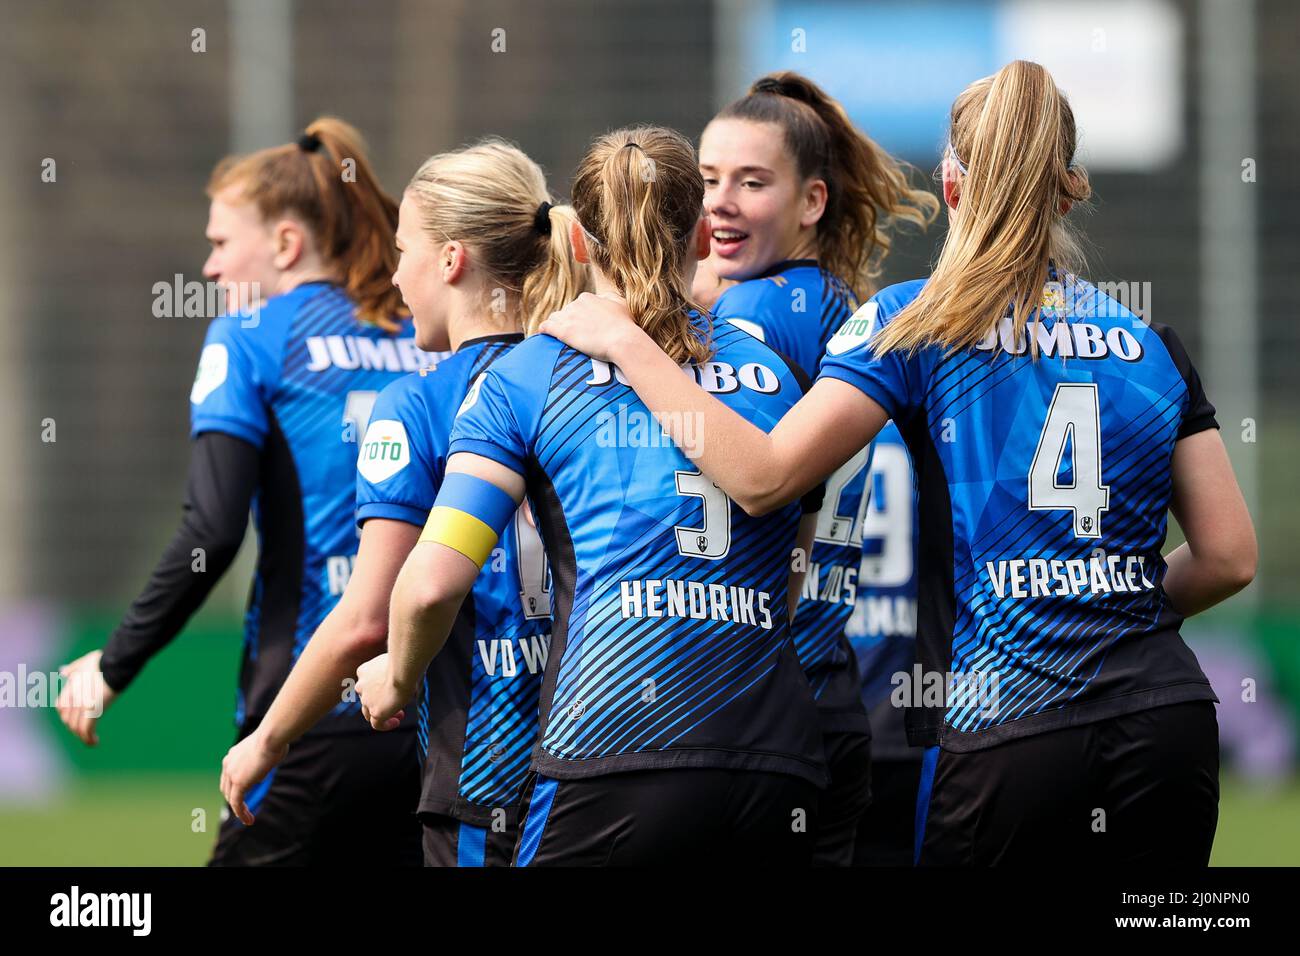 EINDHOVEN, THE NETHERLANDS - MARCH 20: Gwyneth Hendriks of ADO Den Haag  celebrates after scoring the first goal of the team, Amber Verspaget of ADO  Den Haag, Louise van Oosten of ADO